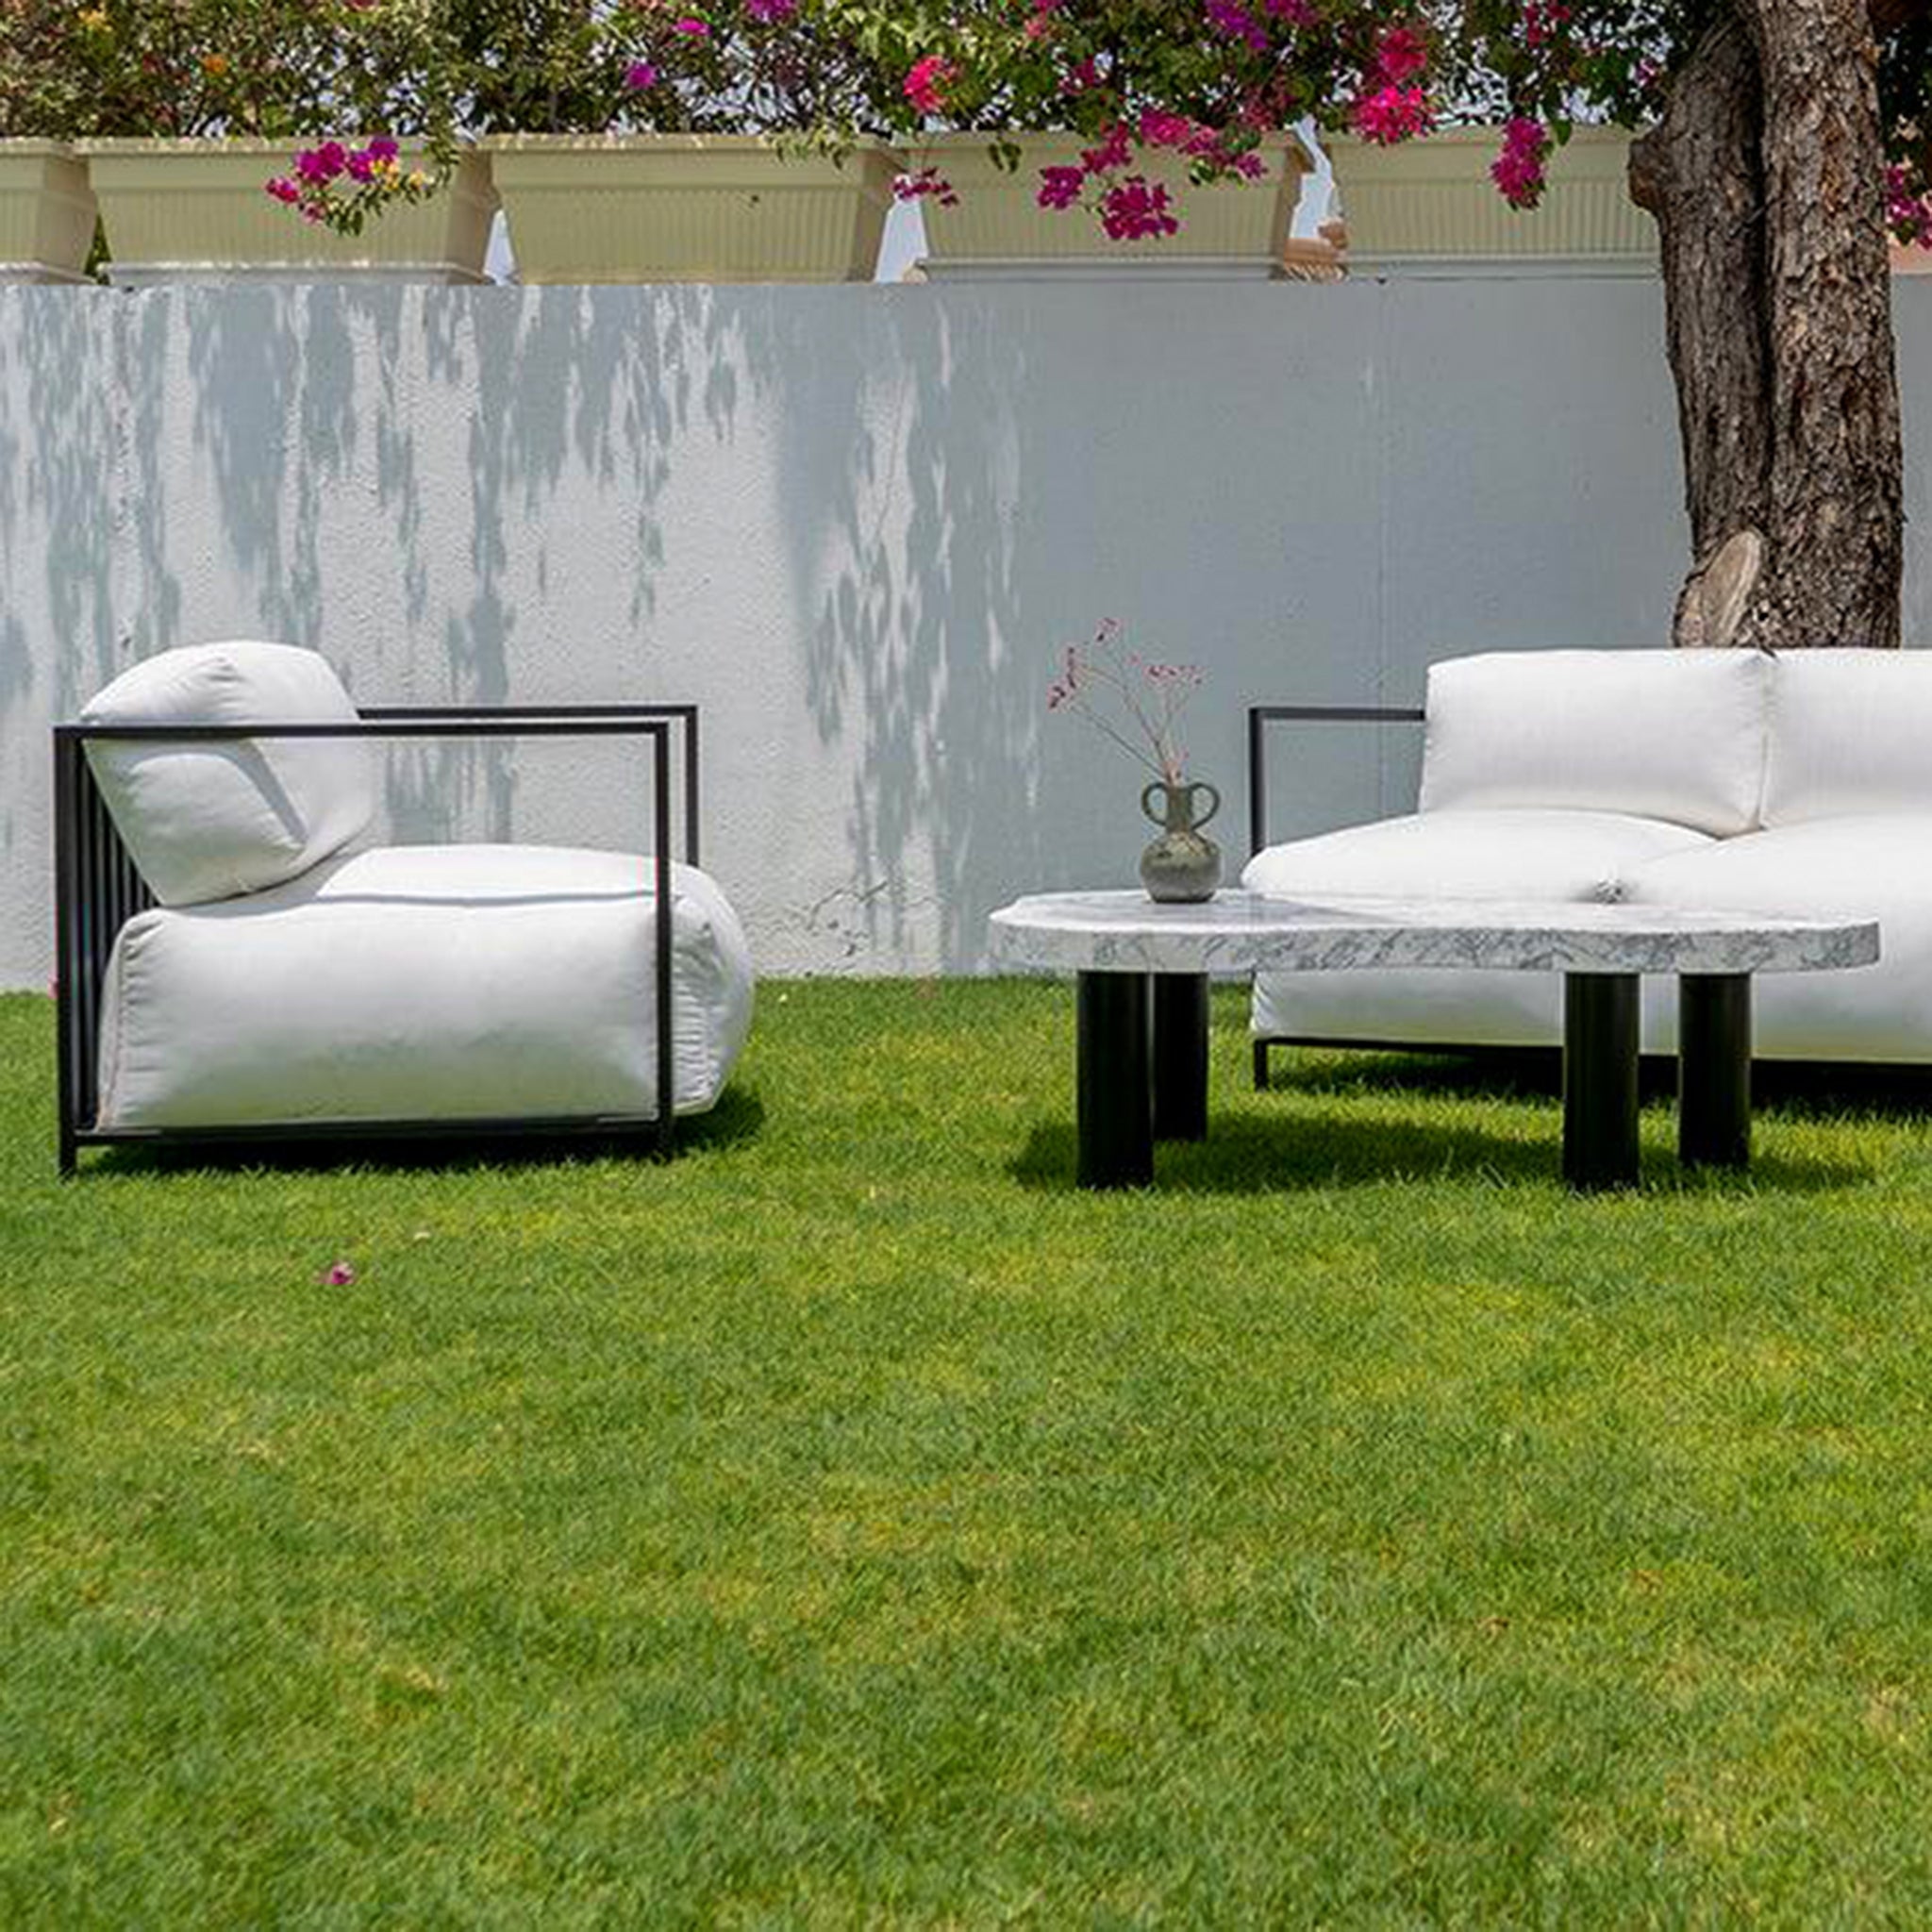 Outdoor garden setup featuring The Dexter Accent Chair with white cushions and black metal frame, paired with a matching sofa and a marble coffee table on a lush green lawn.